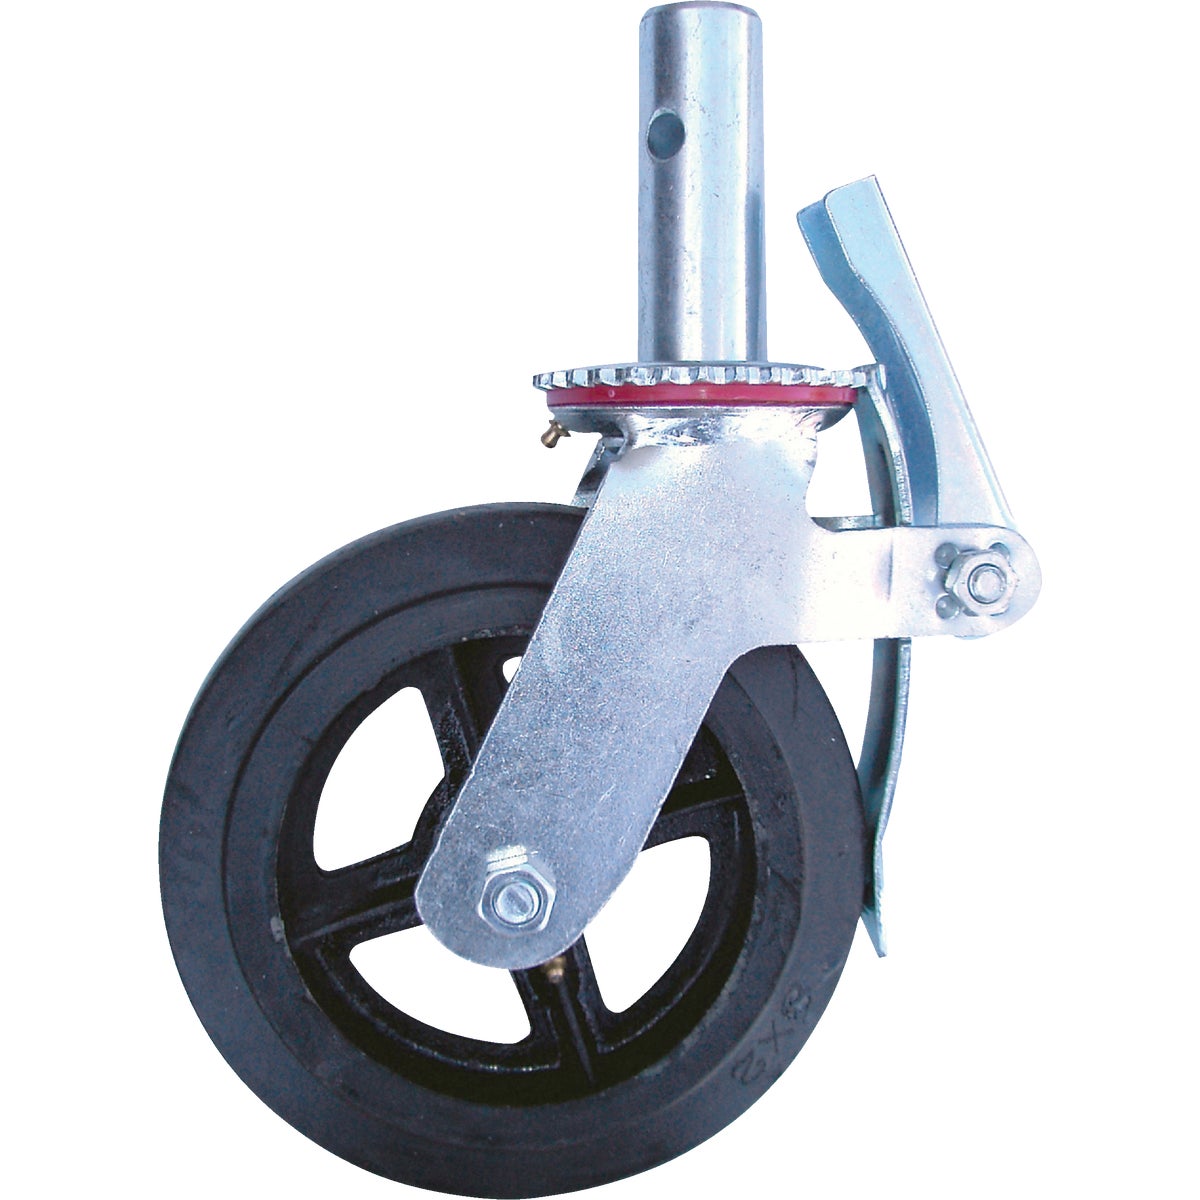 Item 771068, MetalTech offers this durable heavy-duty caster that is designed to work 